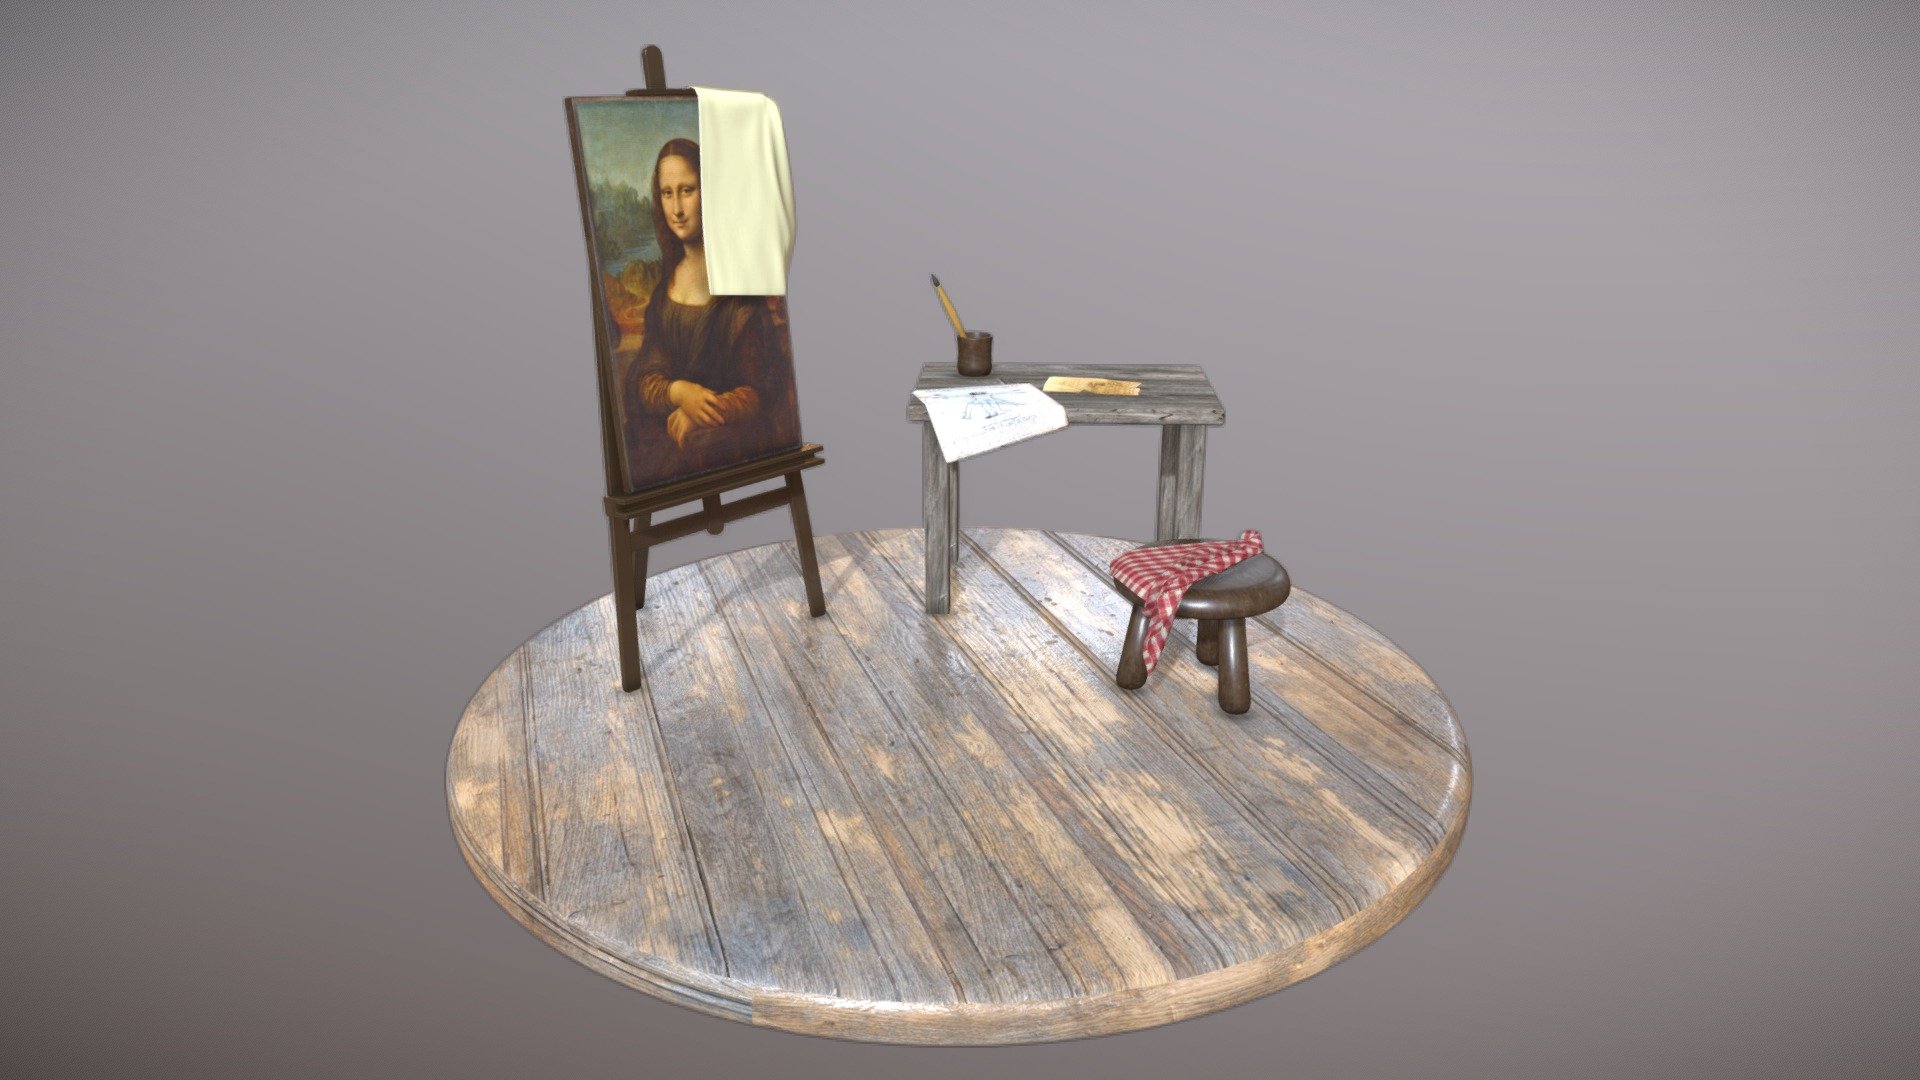 Da Vinci workshop with the Mona Lisa painting on the easel - Da Vinci workshop - Download Free 3D model by Wittybacon 3d model